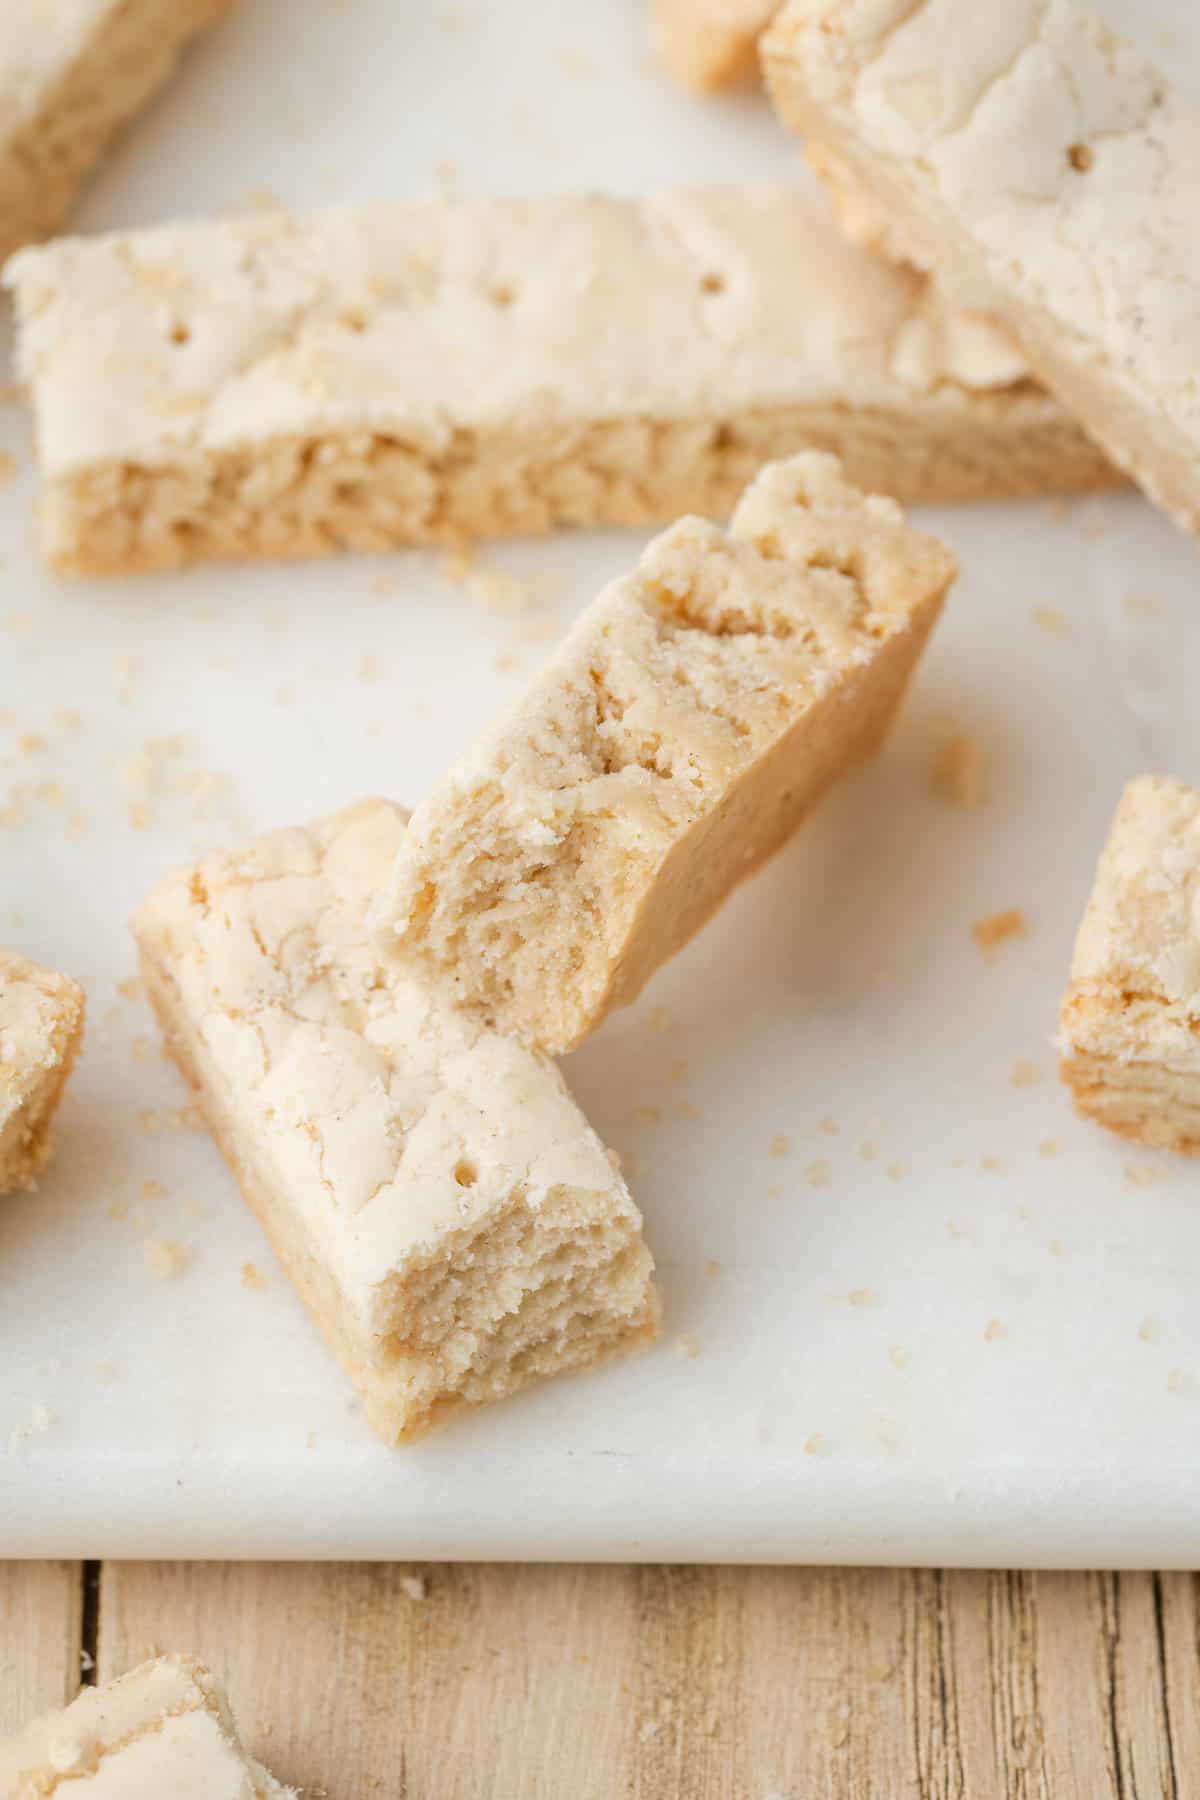 Gluten free shortbread cookies are shown on a white background.